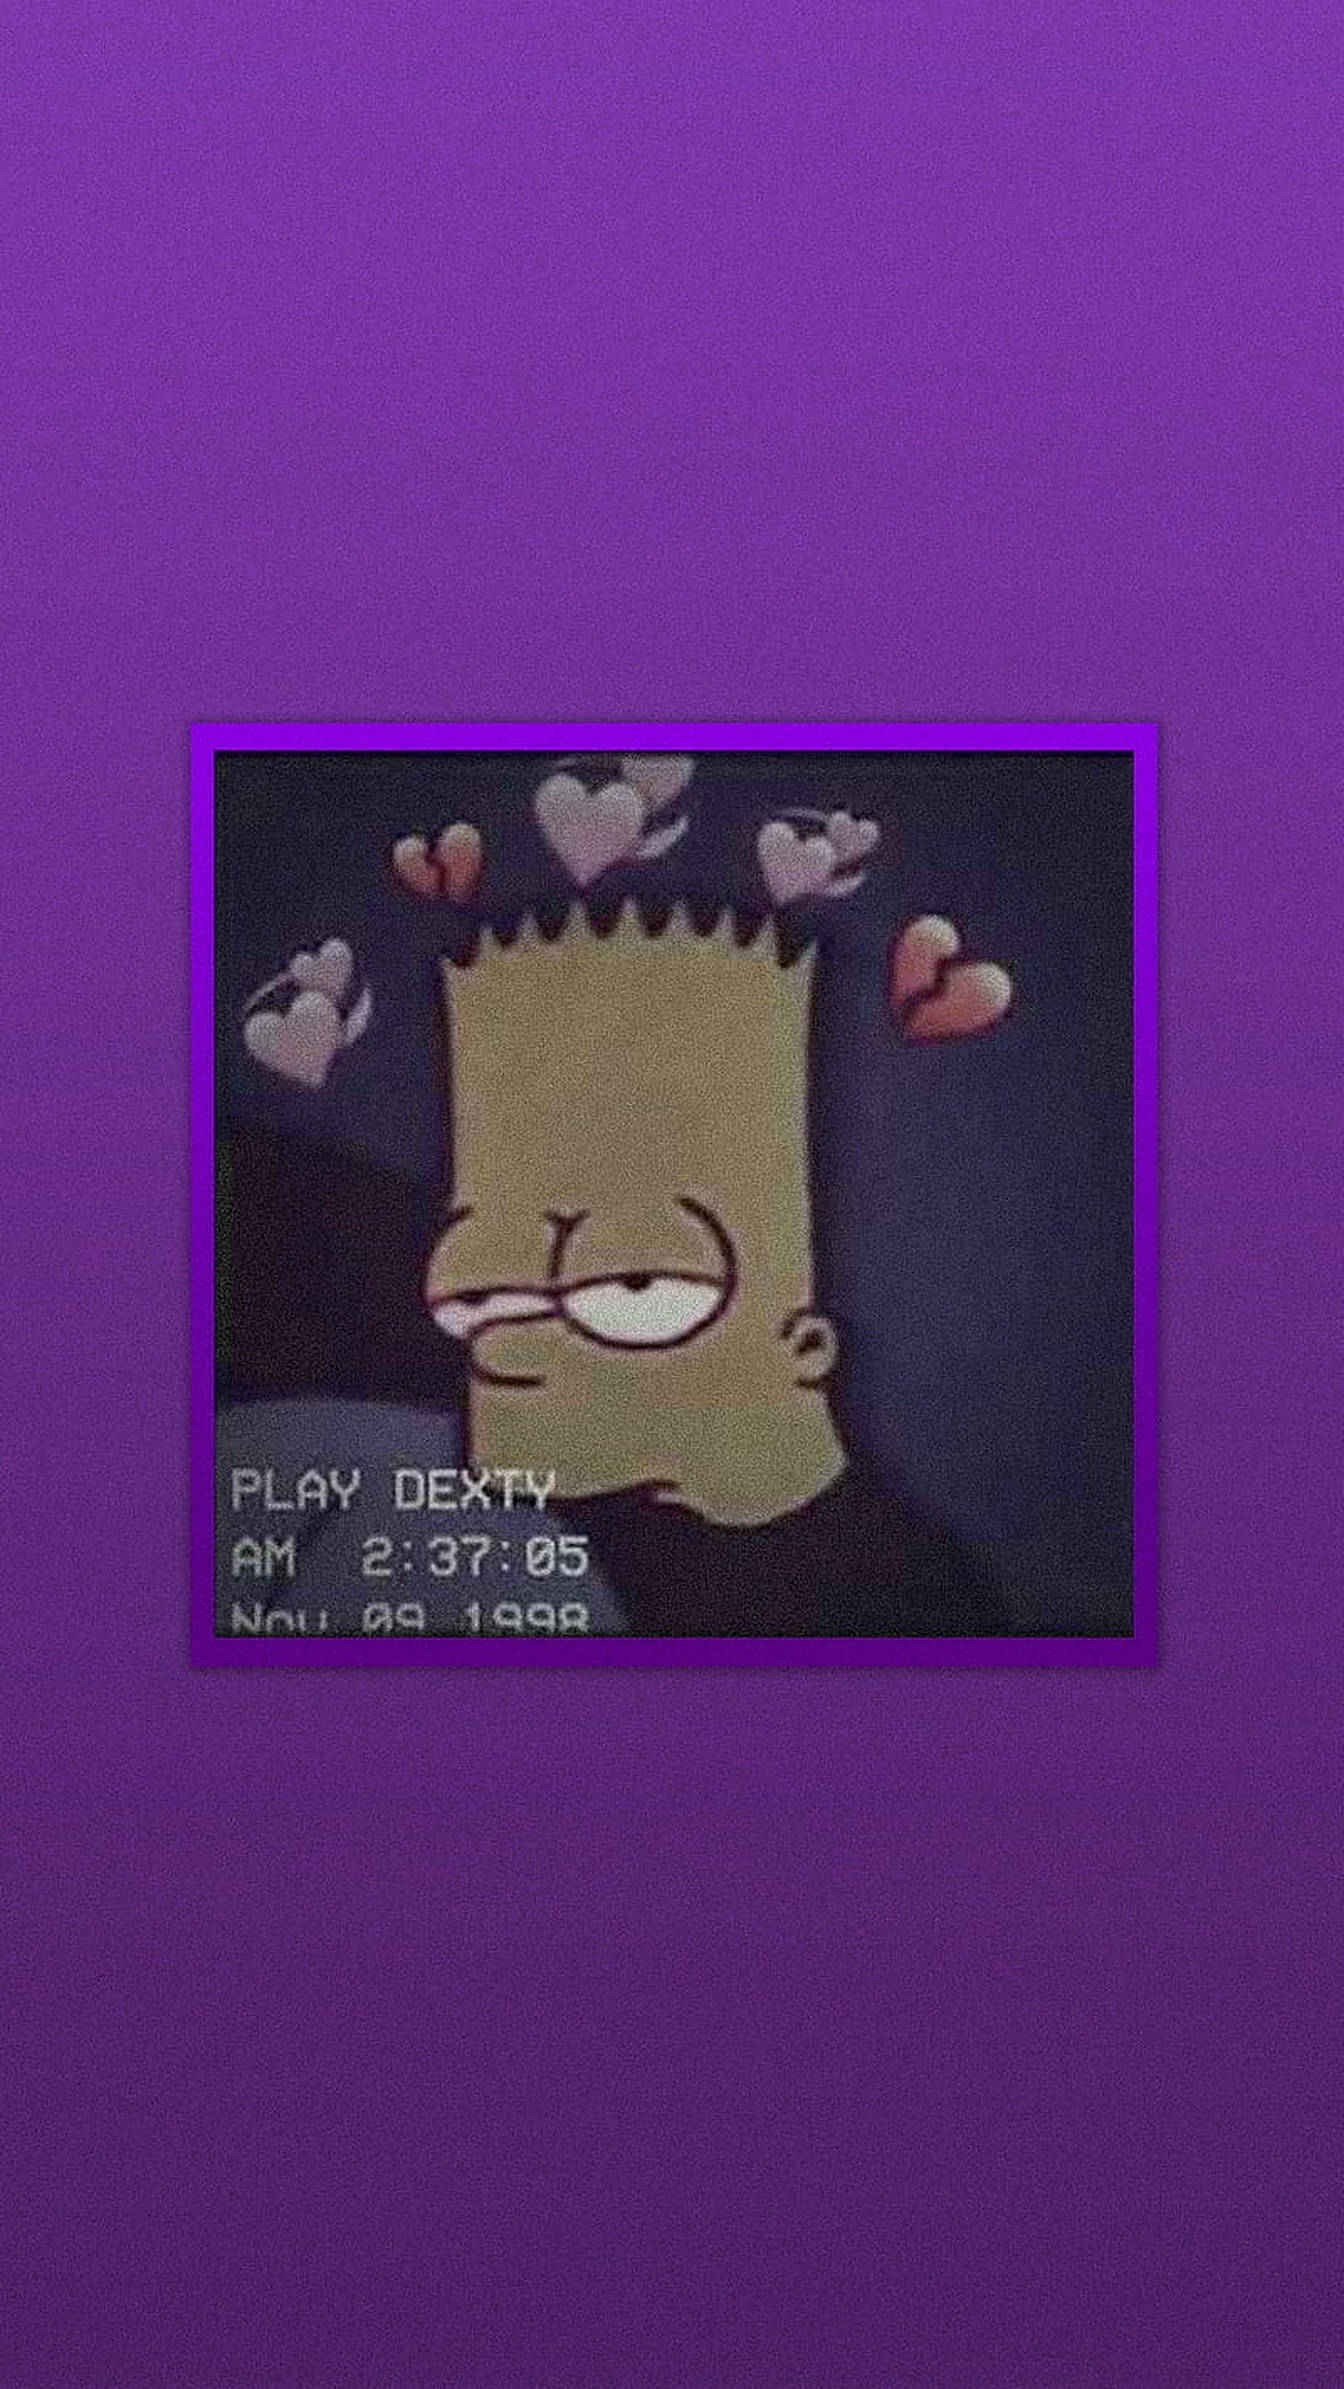 A purple background with the simpsons on it - The Simpsons